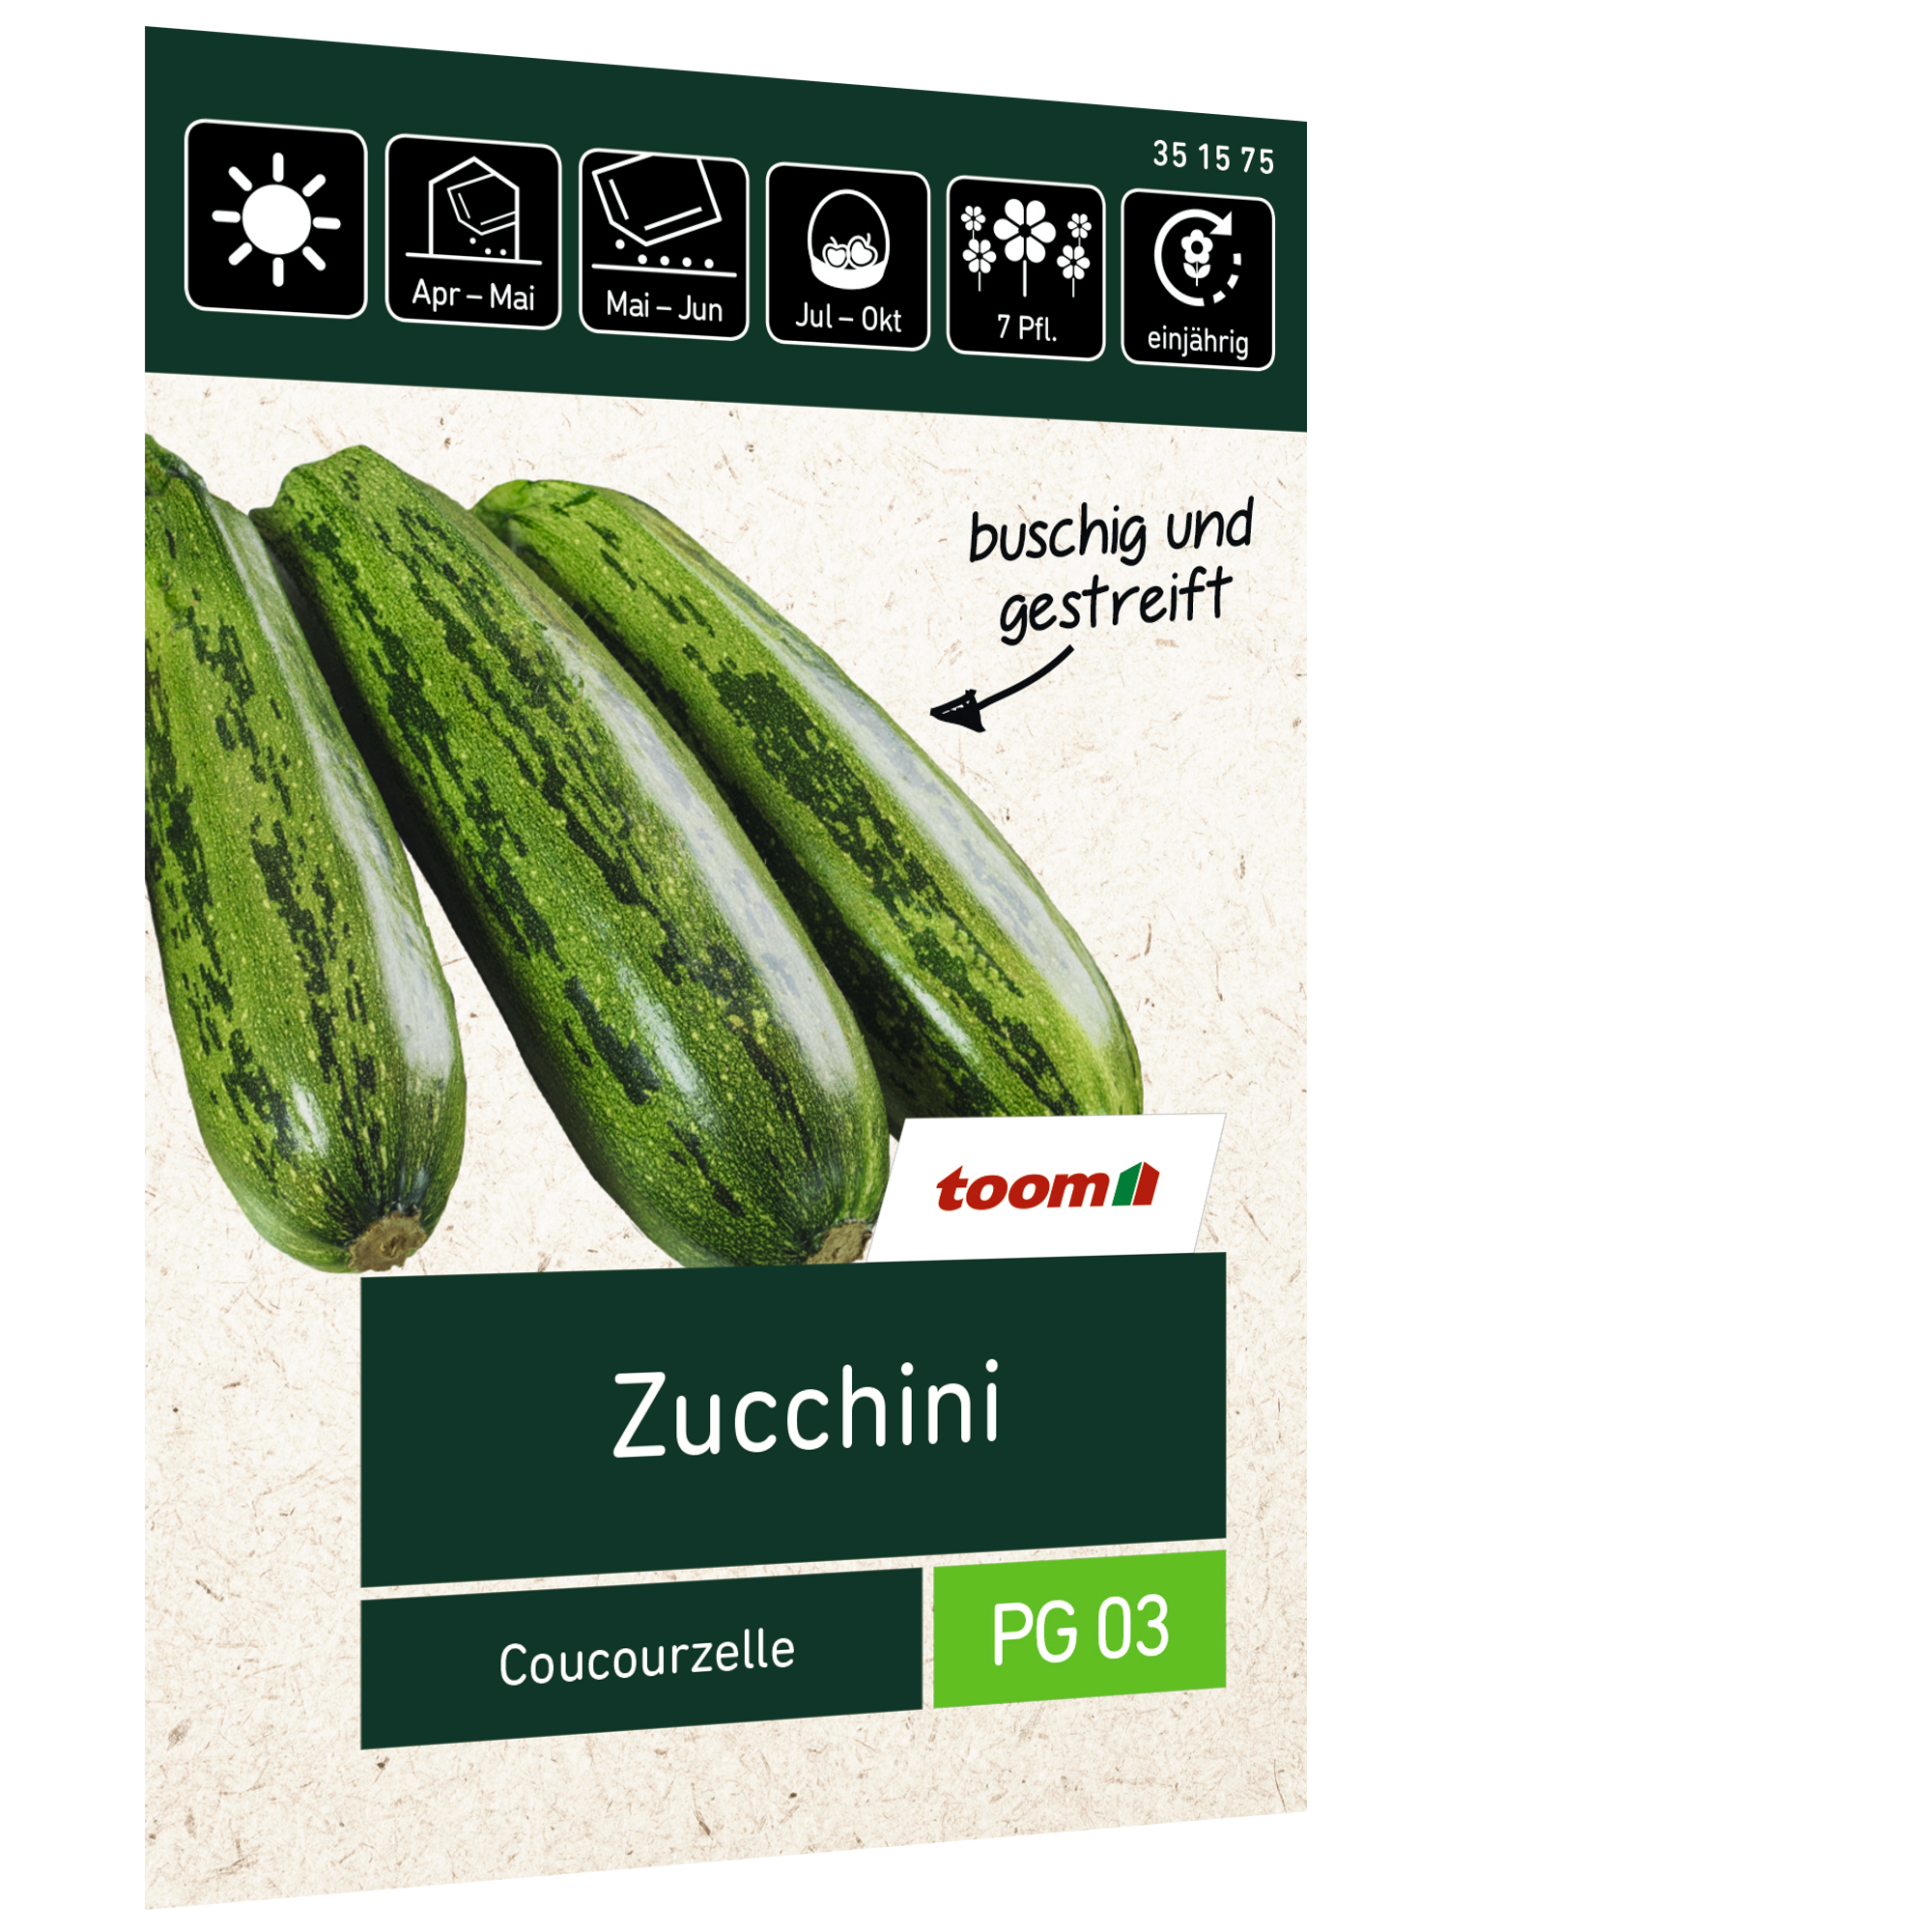 Zucchini 'Coucourzelle' + product picture